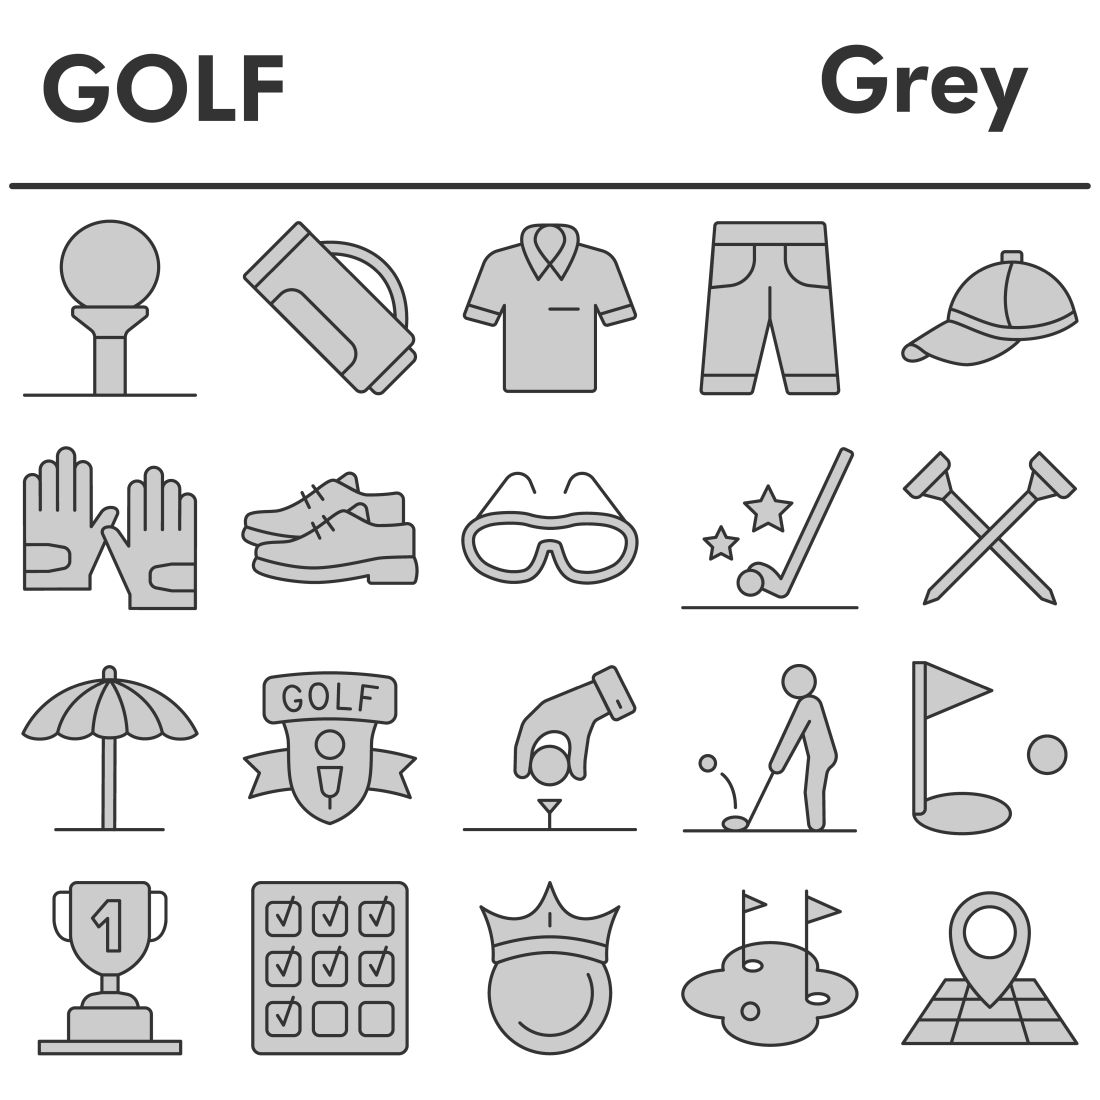 Golf icons set, gray style preview image.